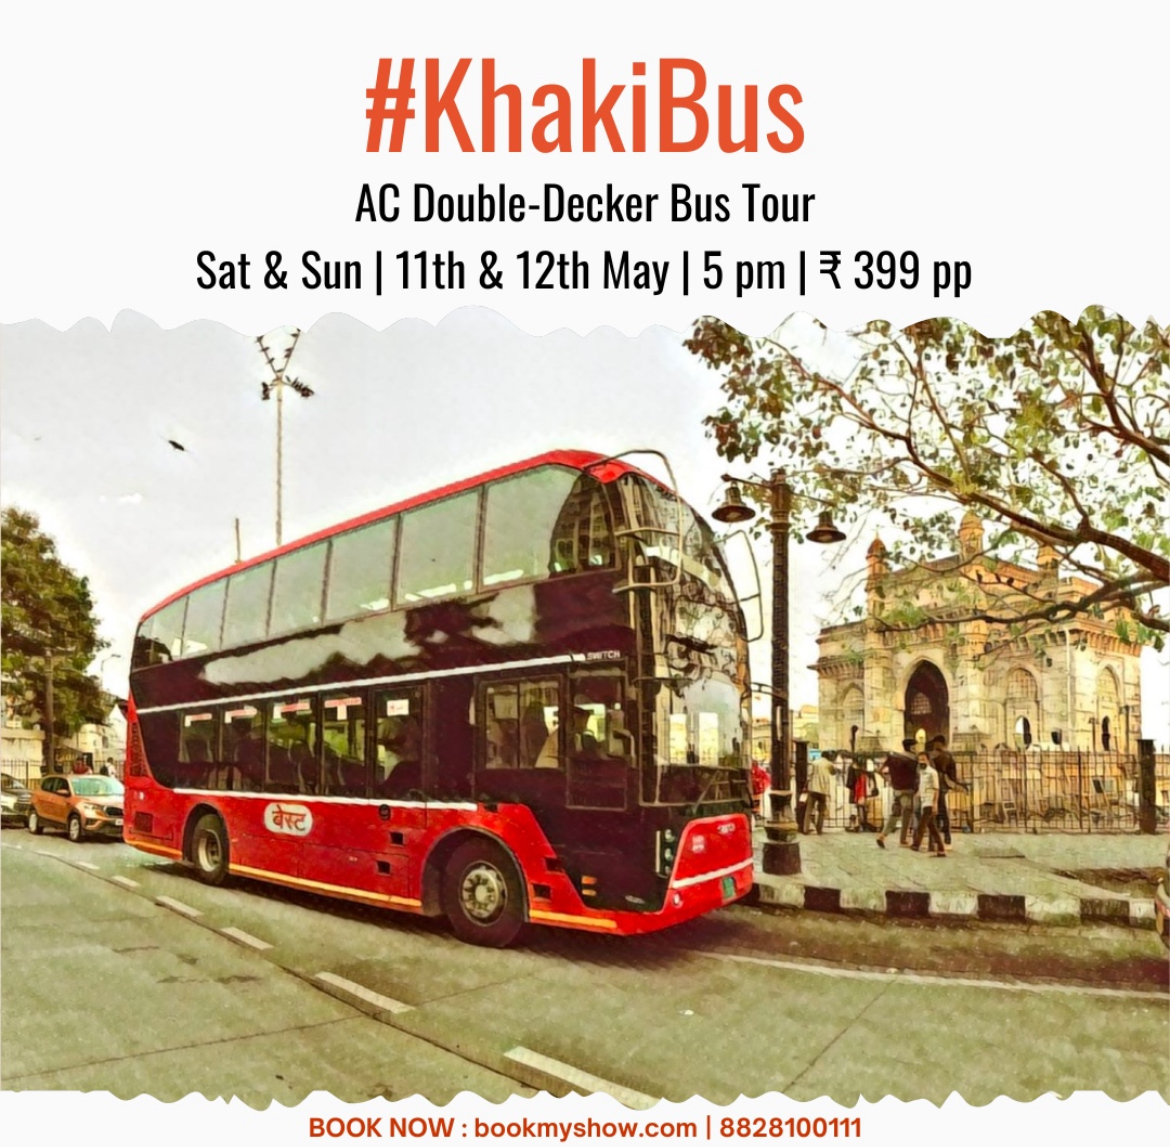 Enjoy a rambling ride through the heart of the city, in our #KhakiBus AC double-decker bus ride.
📷Sat & Sun | 11th & 12th May | 5 PM | ₹399 pp
📷Book now at: in.bookmyshow.com/activities/kha…

#BusRide #BusTours #HeritageBus #Things2DoInMumbai #KhakiTours #ExploreMumbai #HeritageTours